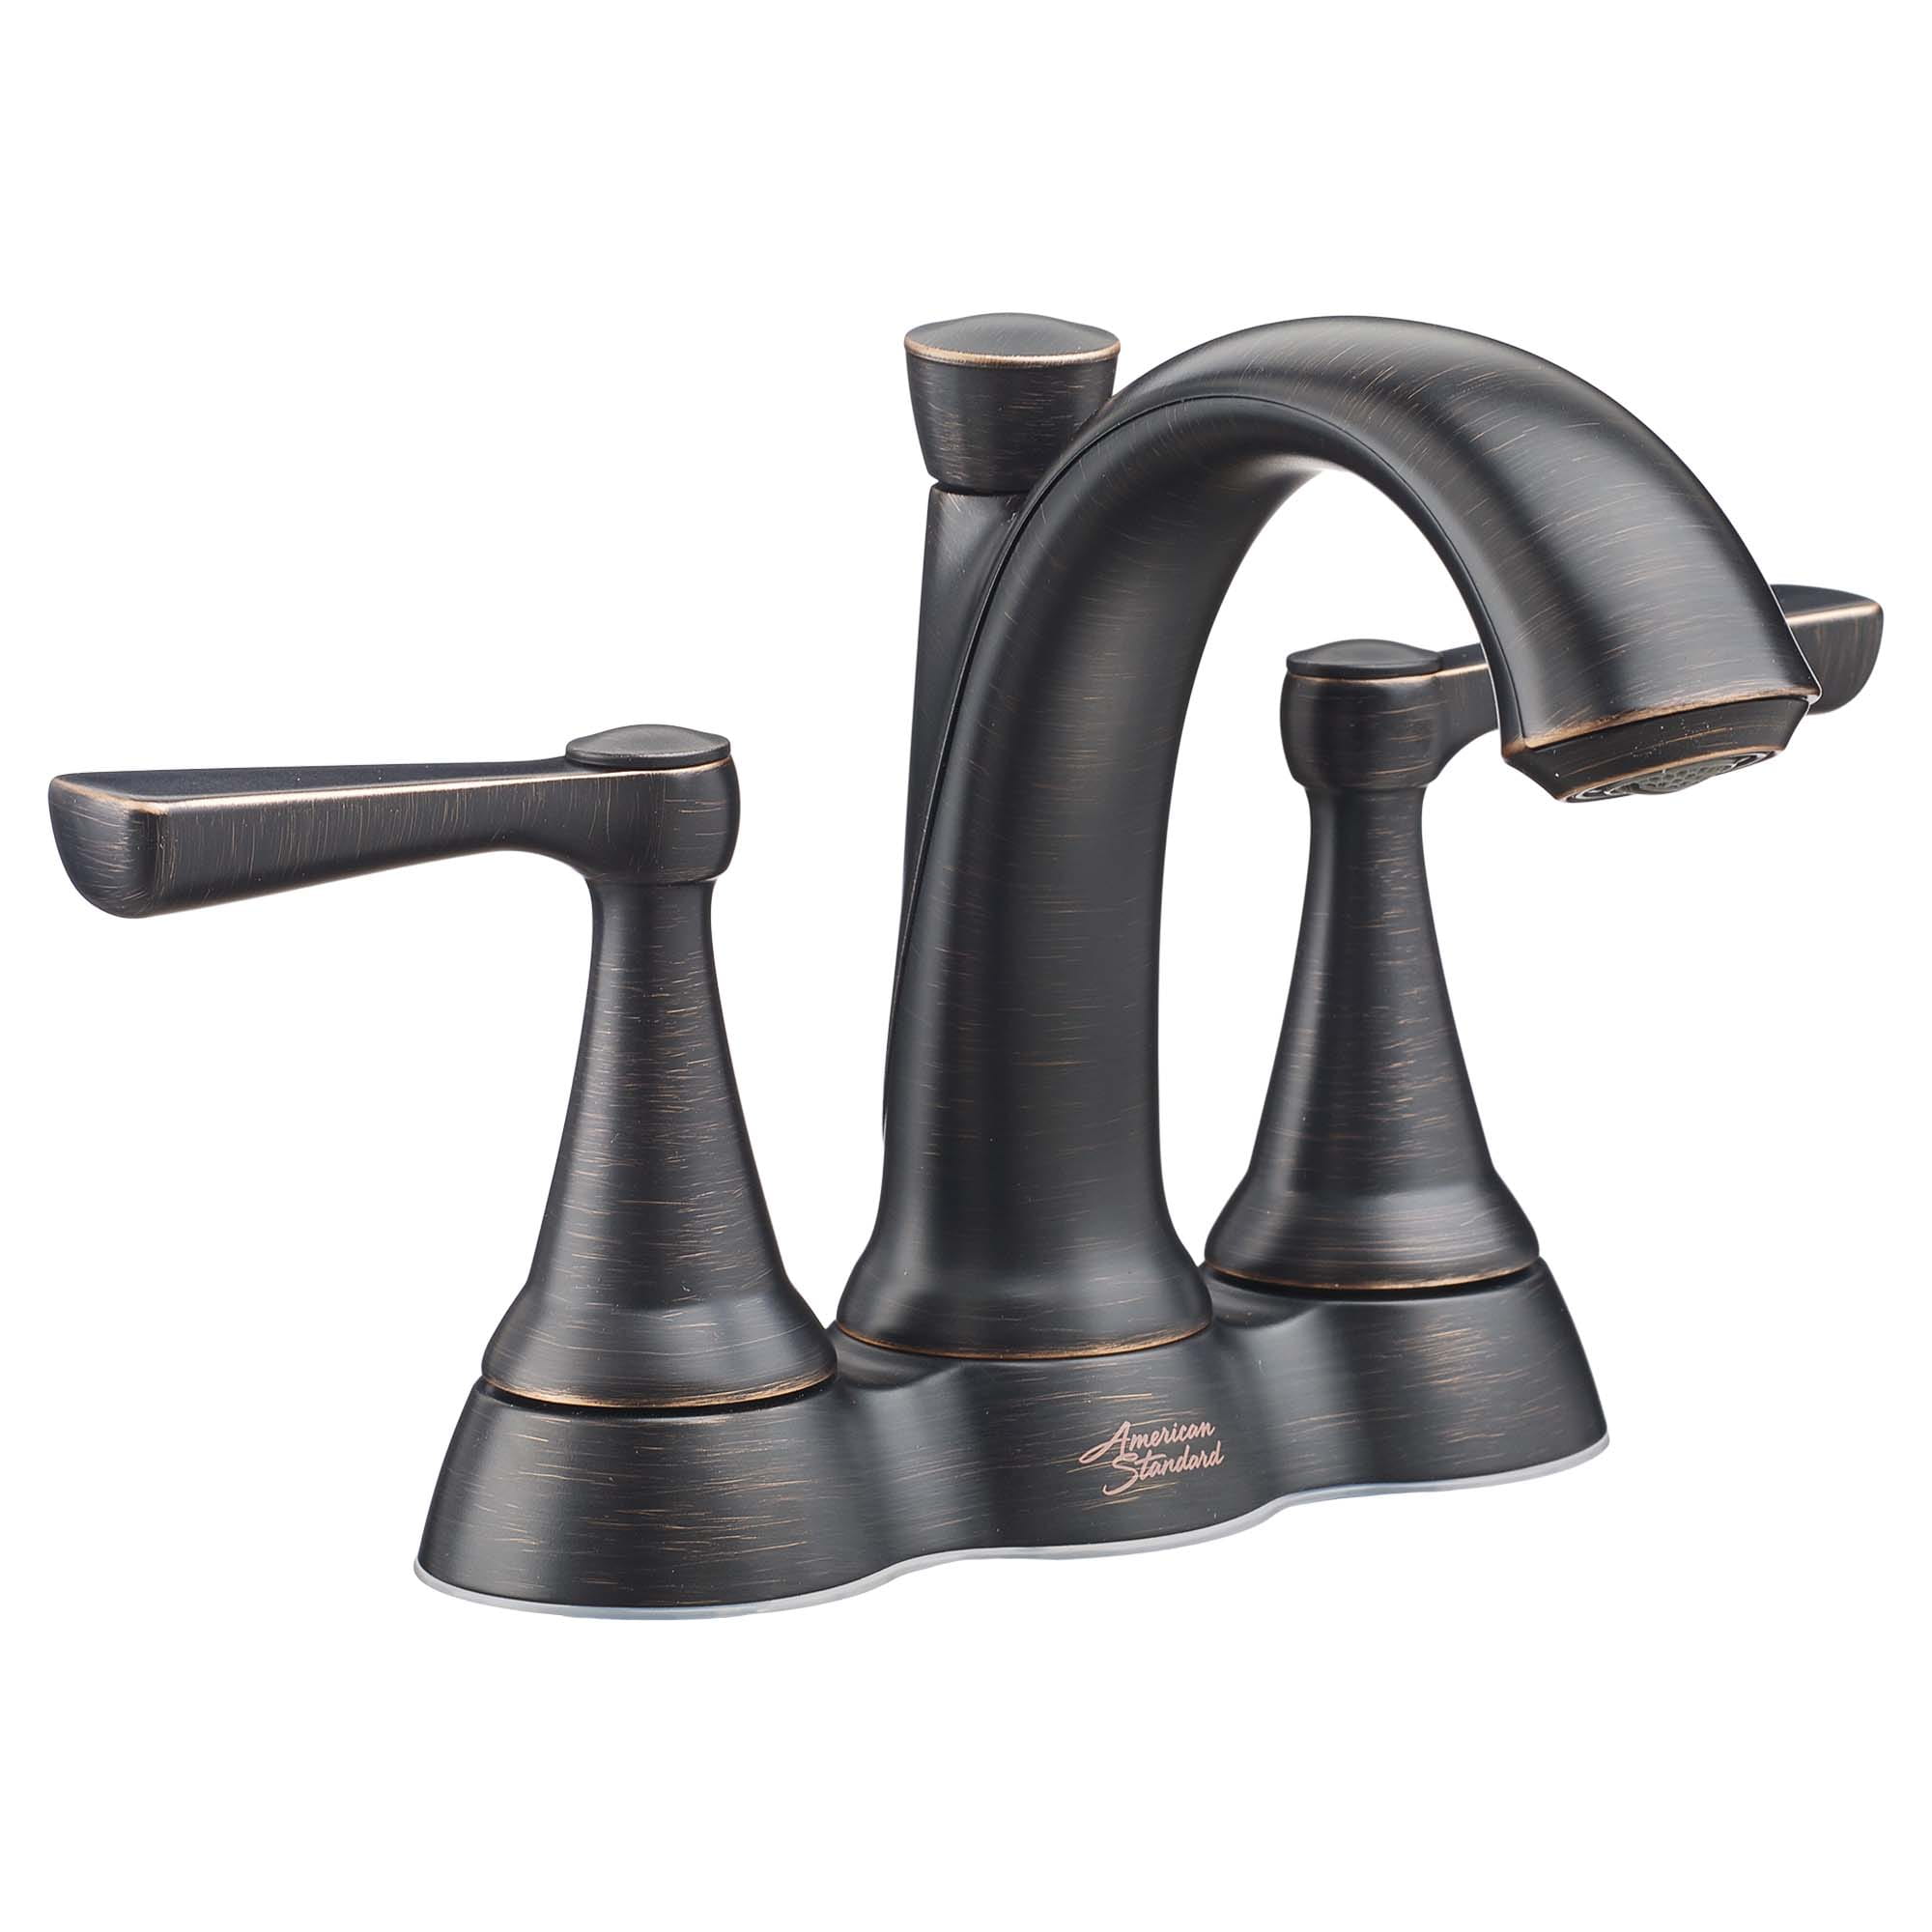 Kempton 4 In Centerset 2 Handle Bathroom Faucet 12 GPM with Lever Handles LEGACY BRONZE